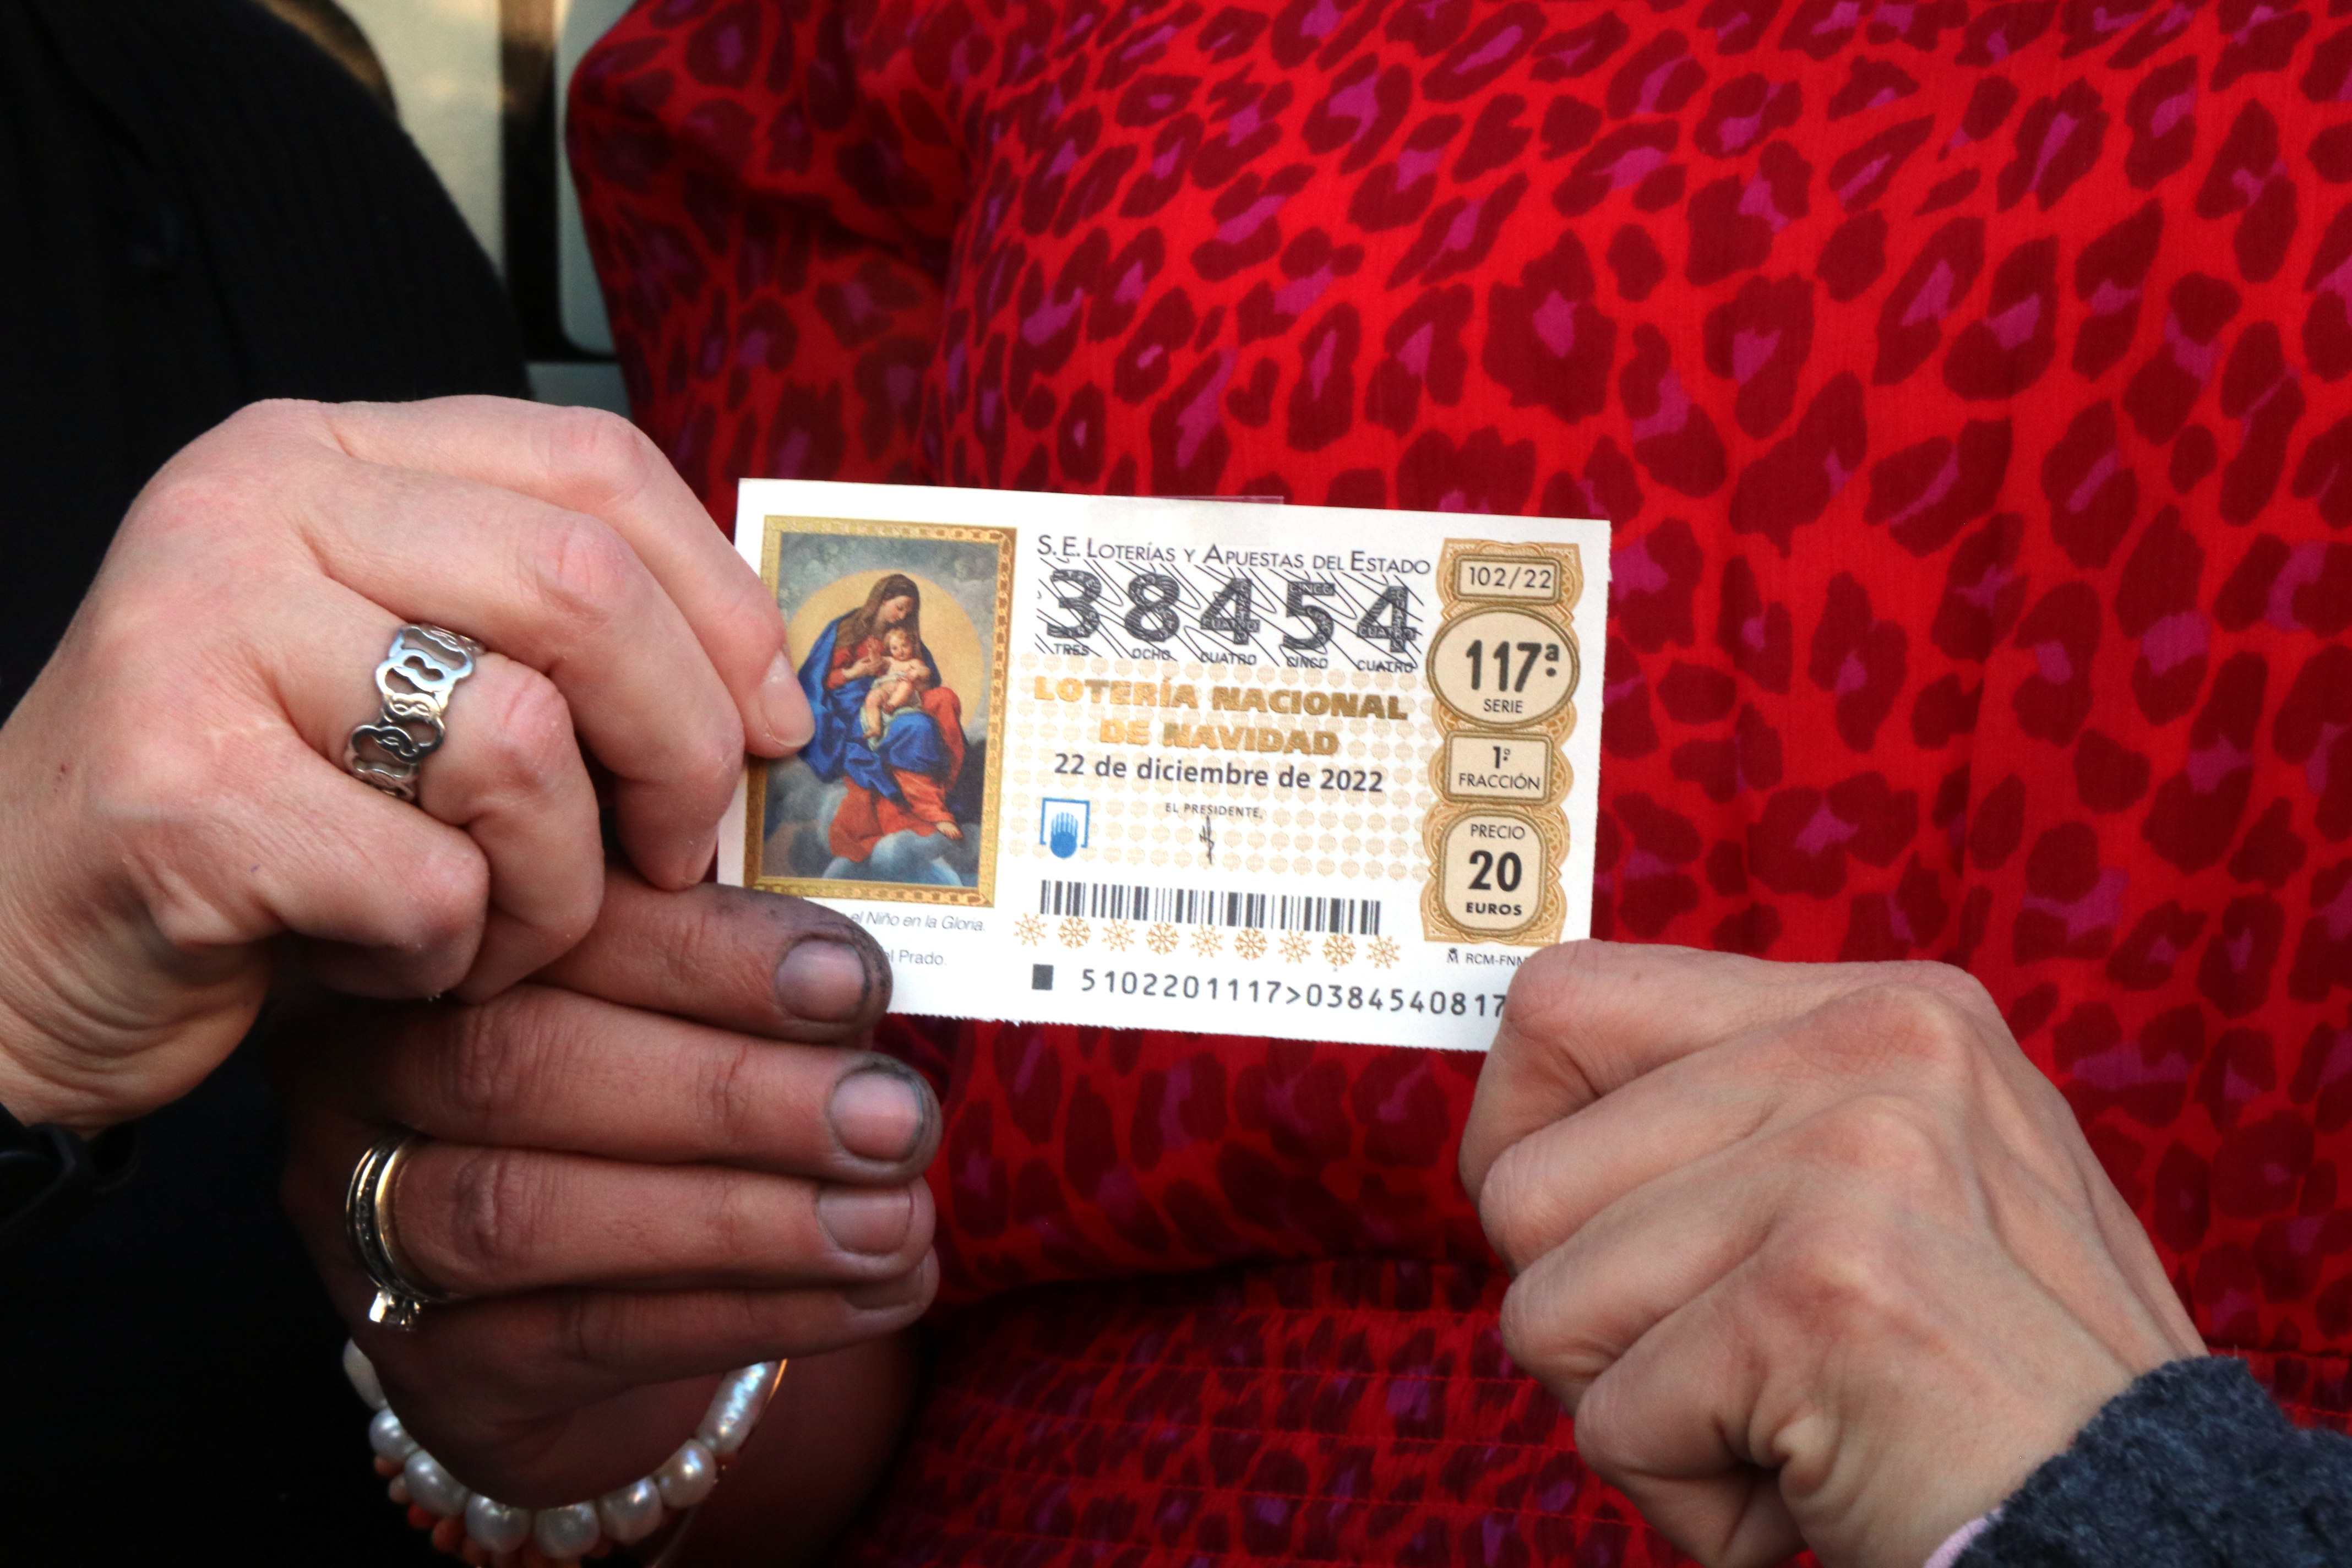 One of the awarded Christmas lottery tickets in Tarragona on December 22, 2022